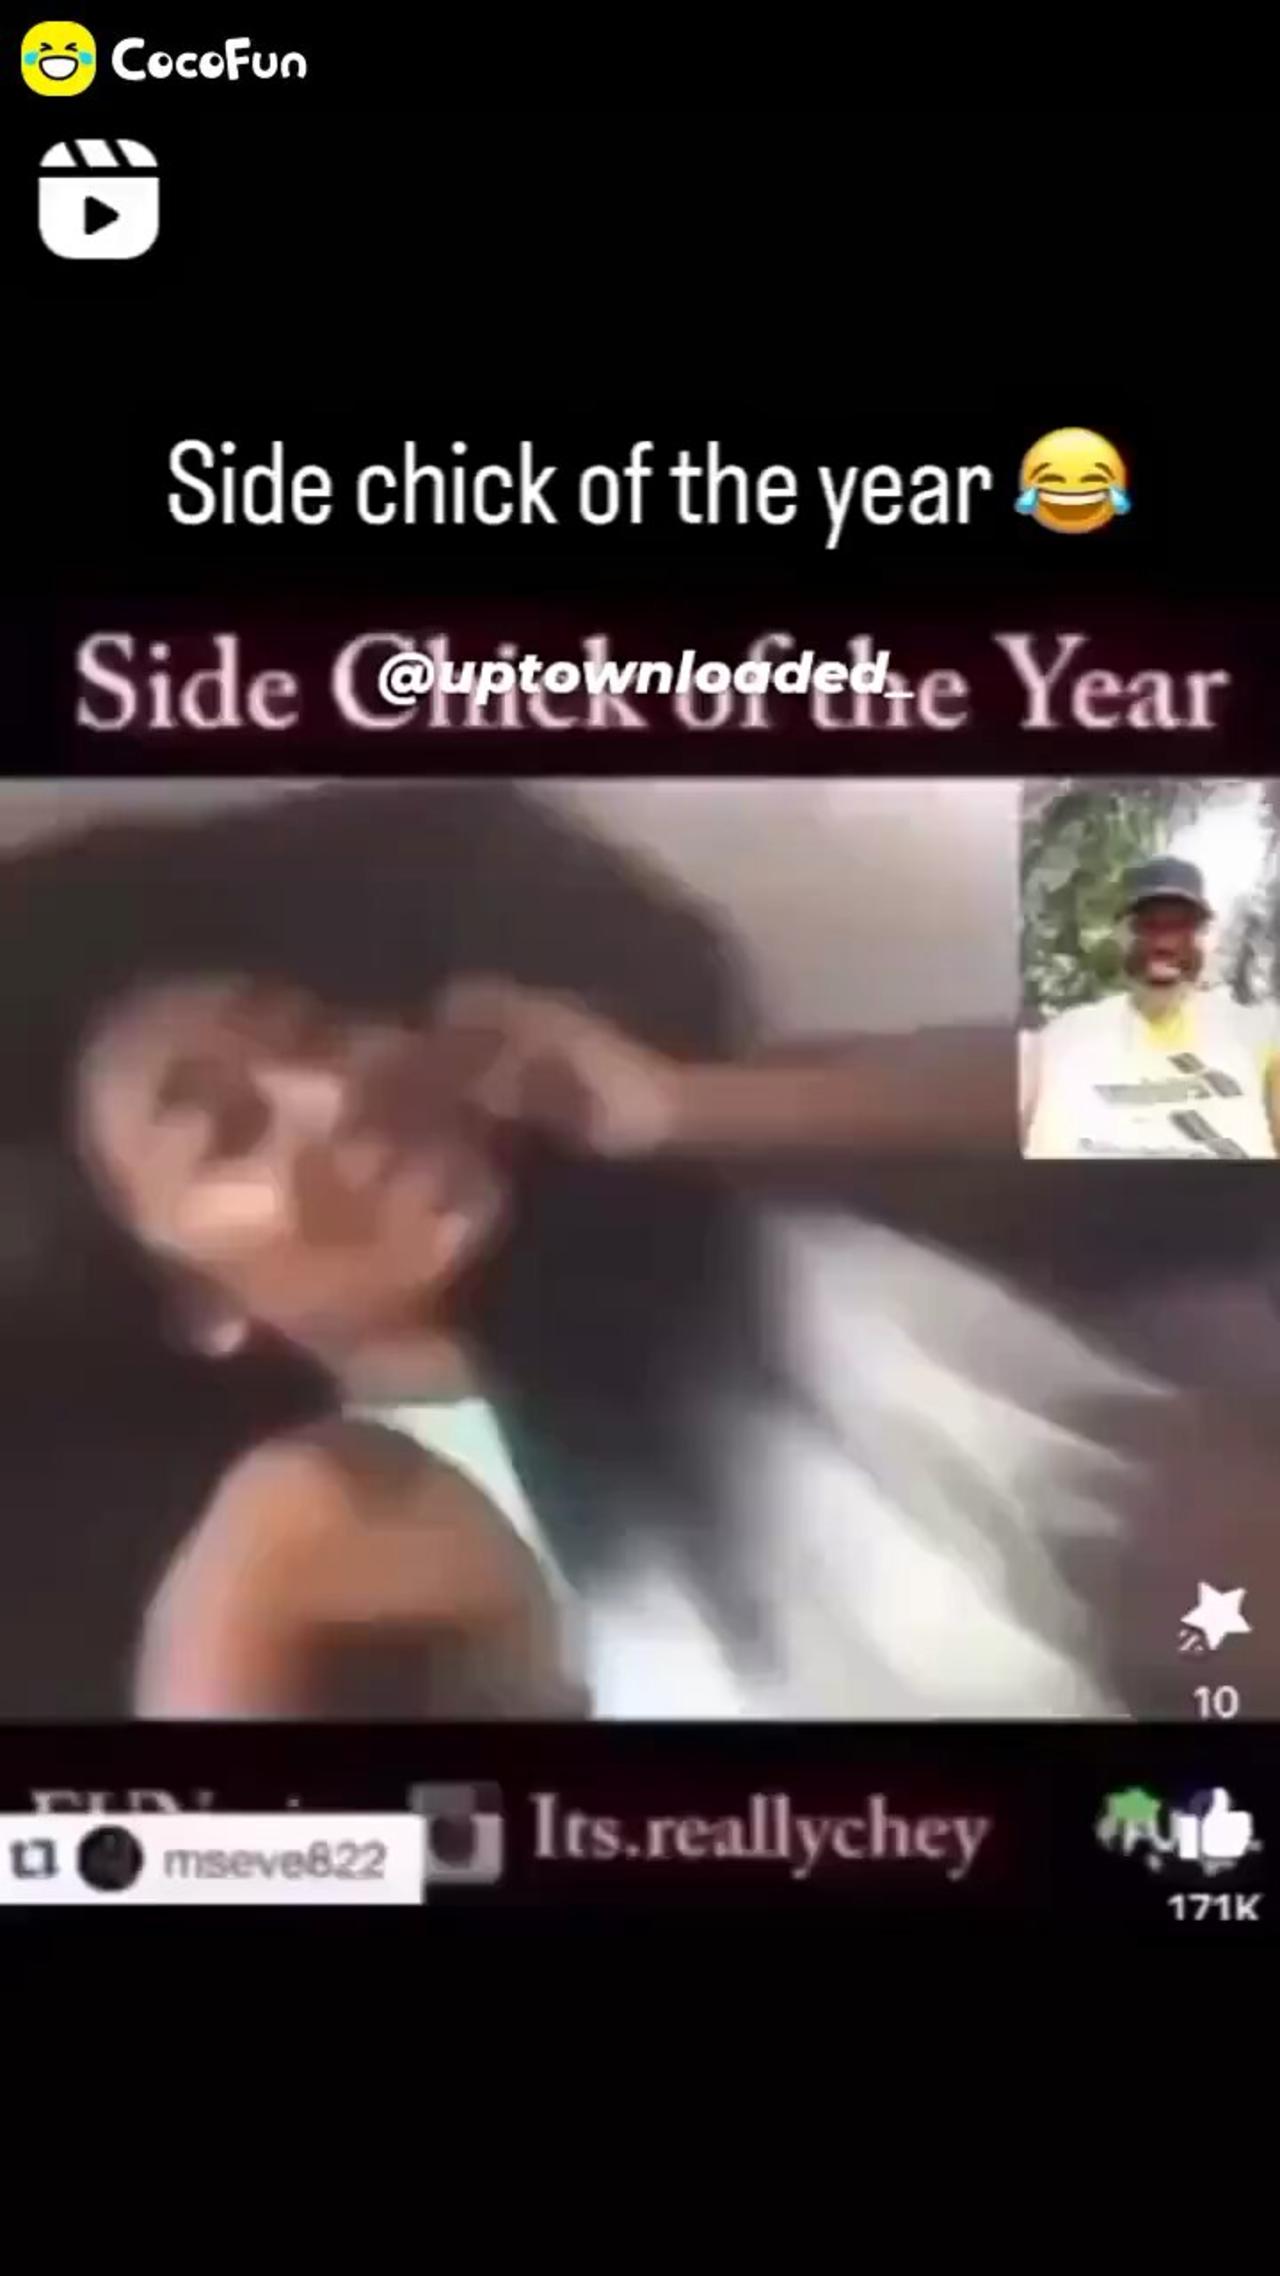 Side chick of the year